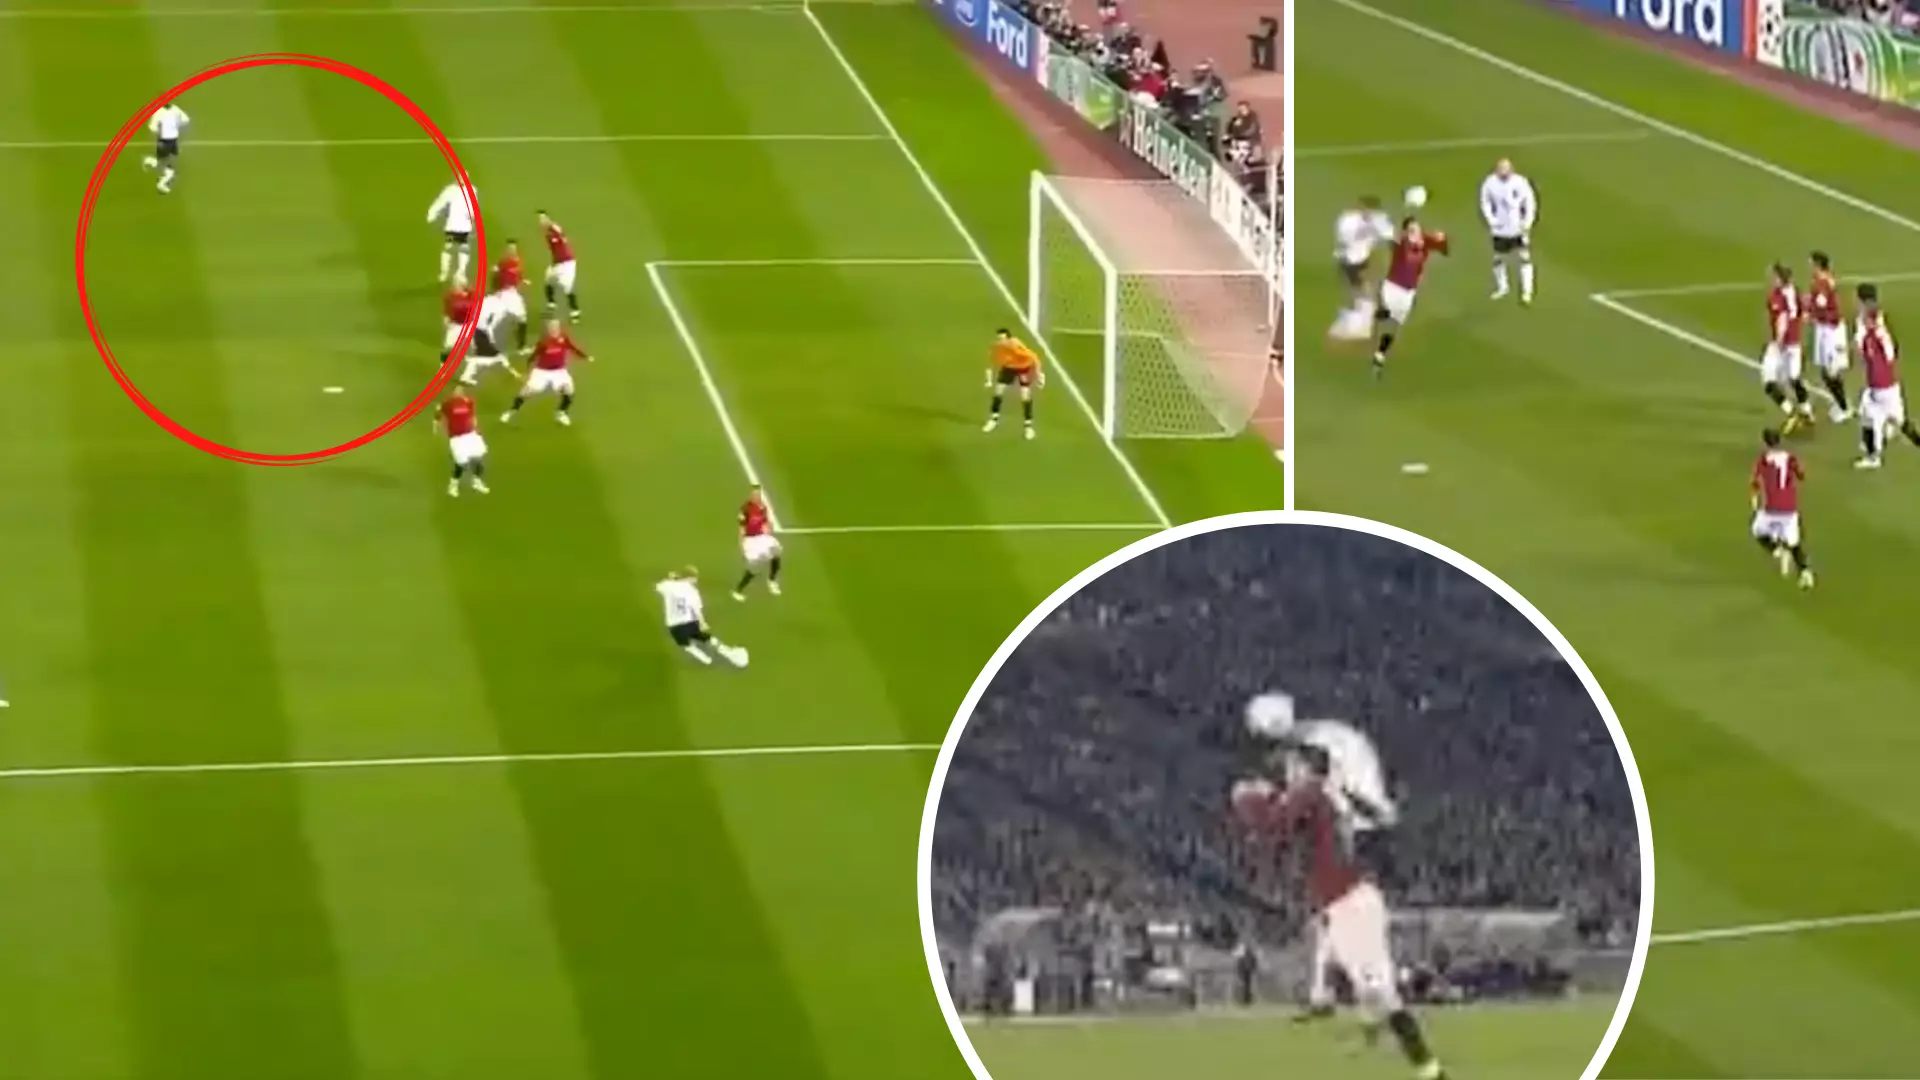 The Incredible Moment Cristiano Ronaldo Scored A Bullet Header After He 'Wasn’t In Frame' For Paul Scholes’ Cross